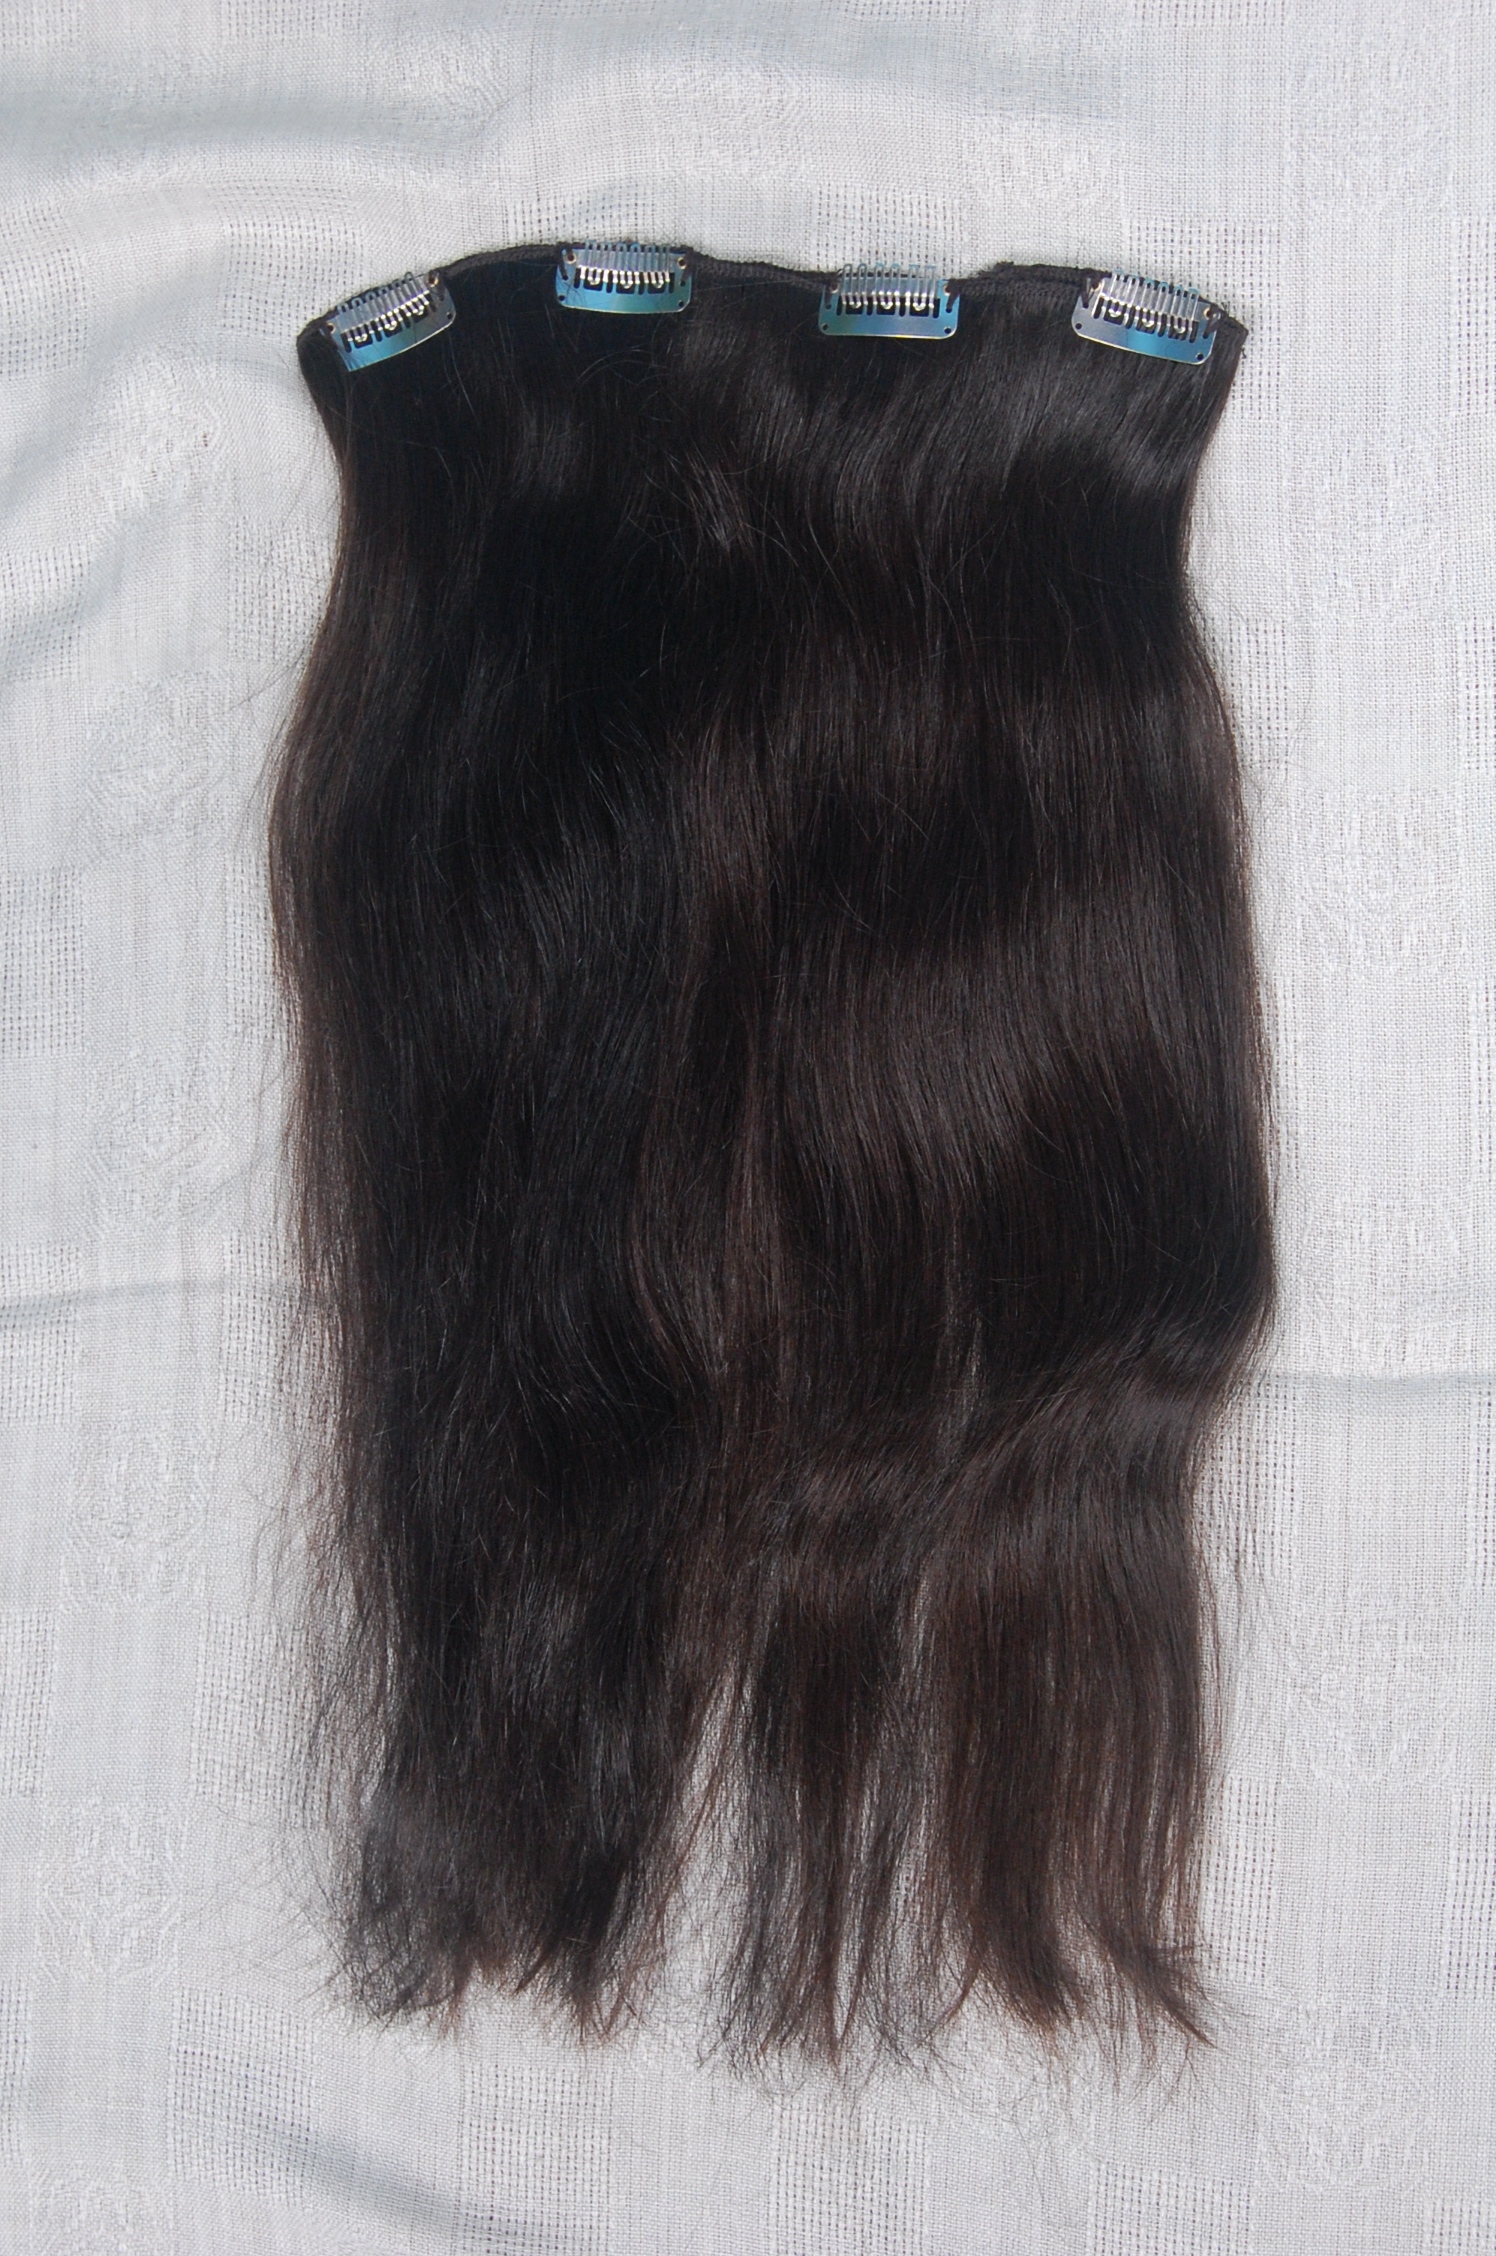 Clip Hair Extension, for Parlour, Personal, Style : Straight